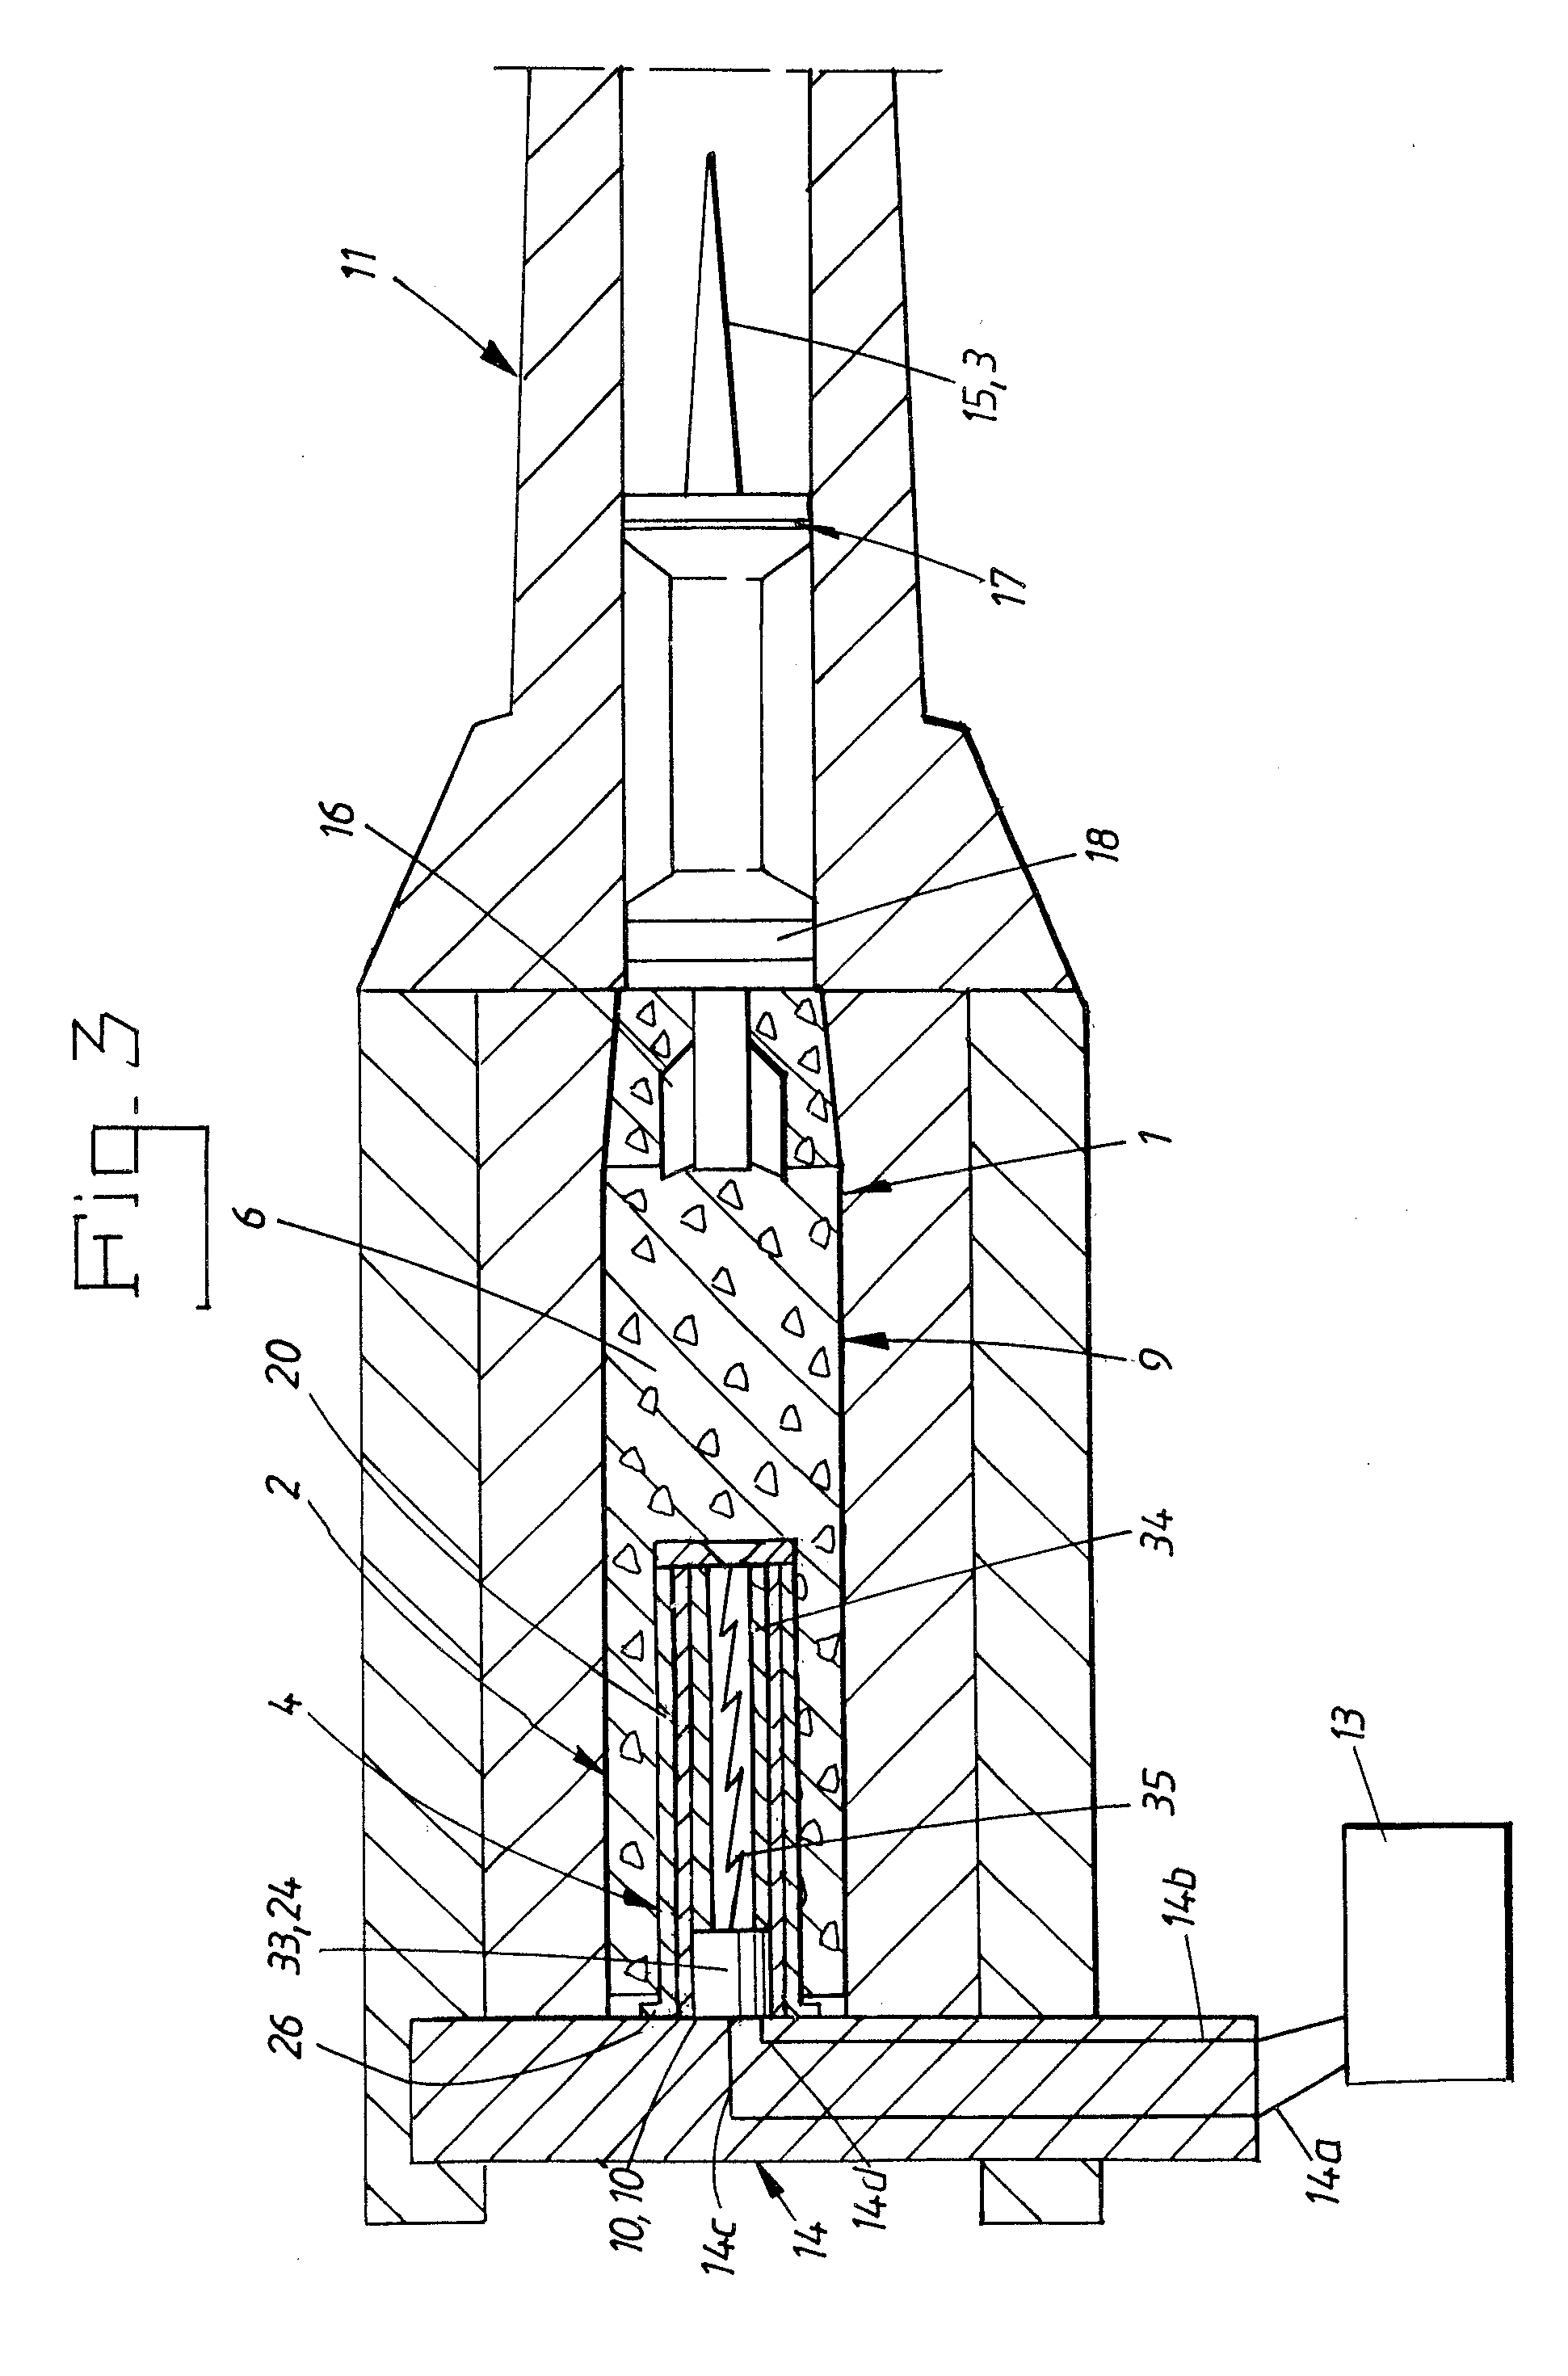 Plasma generator comprising sacrificial material and method for forming plasma, as well as ammunition shot comprising a plasma genrator of this type